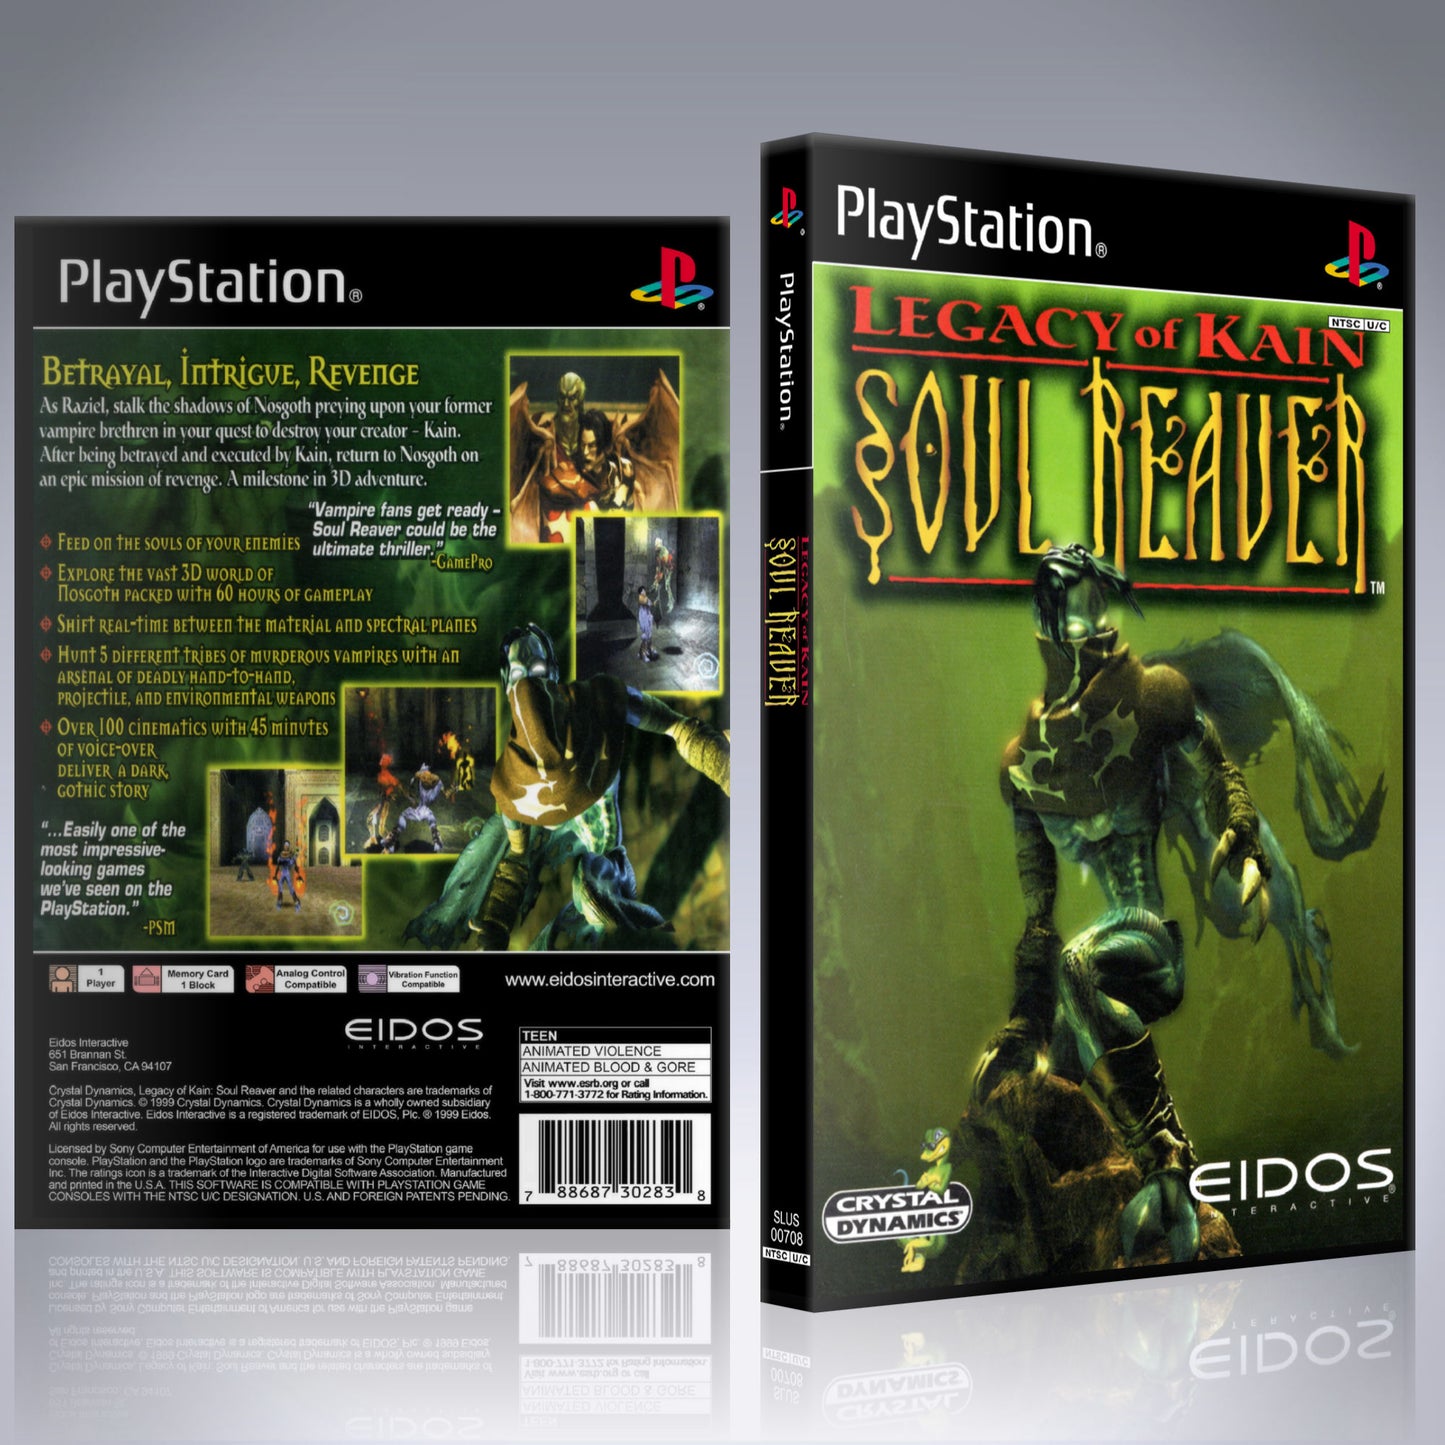 PS1 Case - NO GAME - Legacy of Kain - Soul Reaver